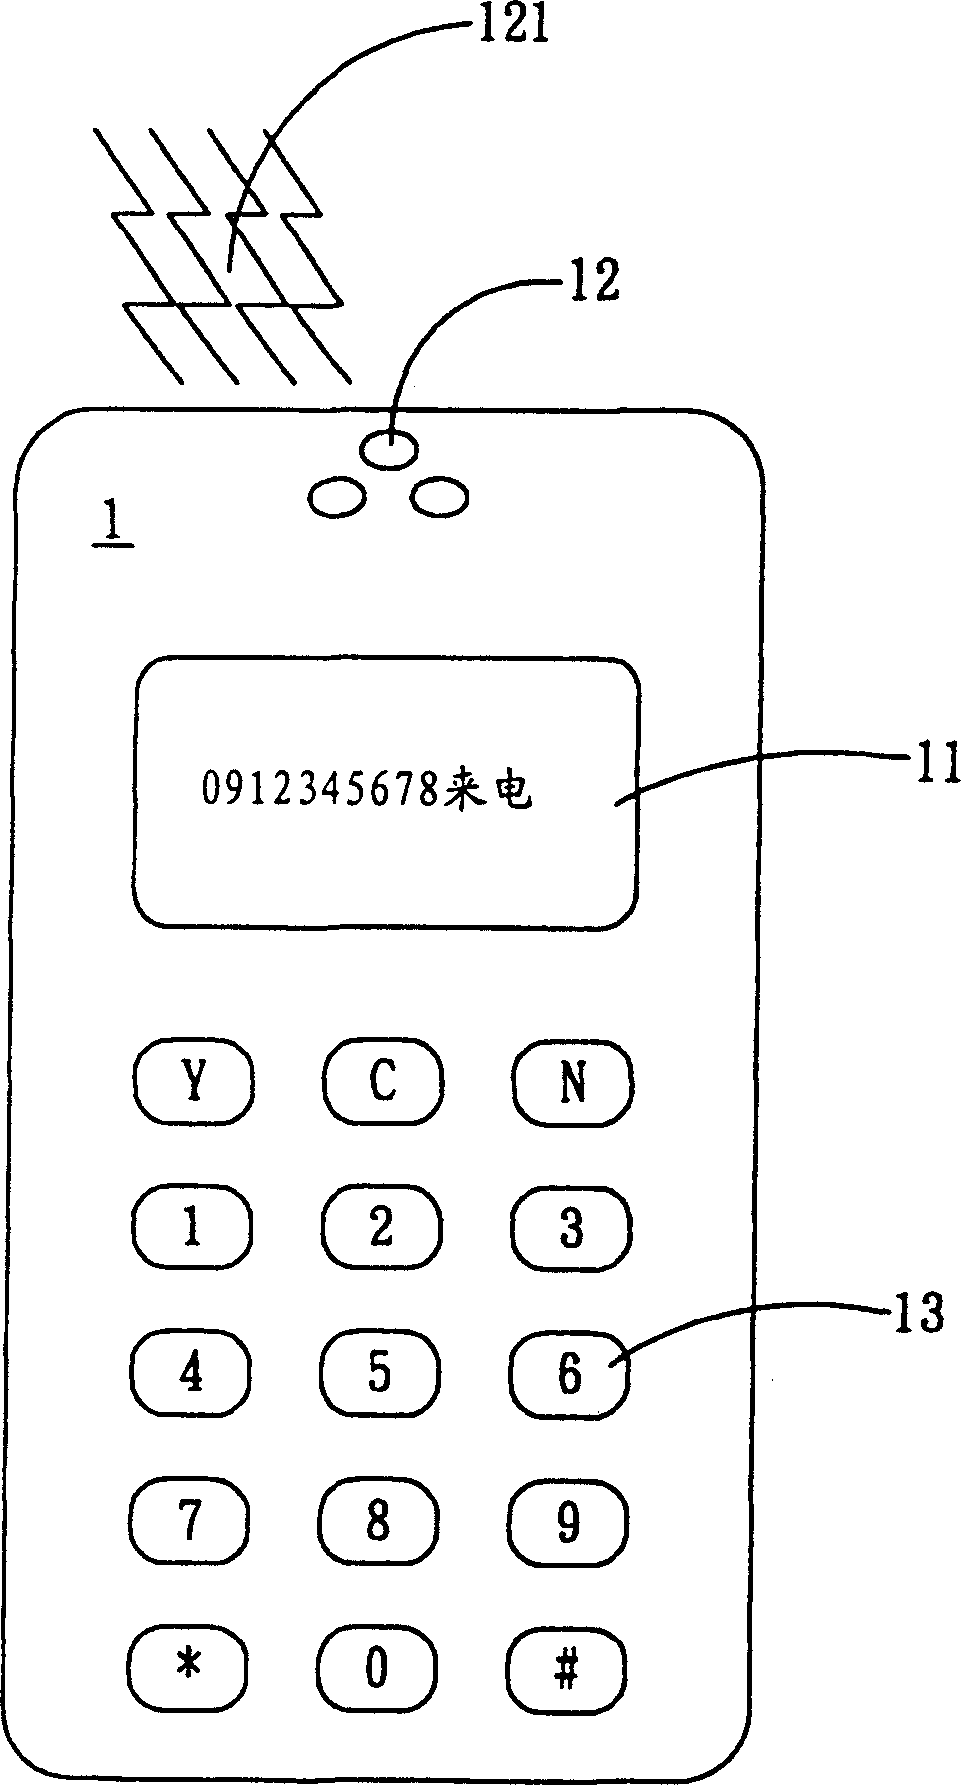 Guide vocie personal mobile communication device and processing method thereof